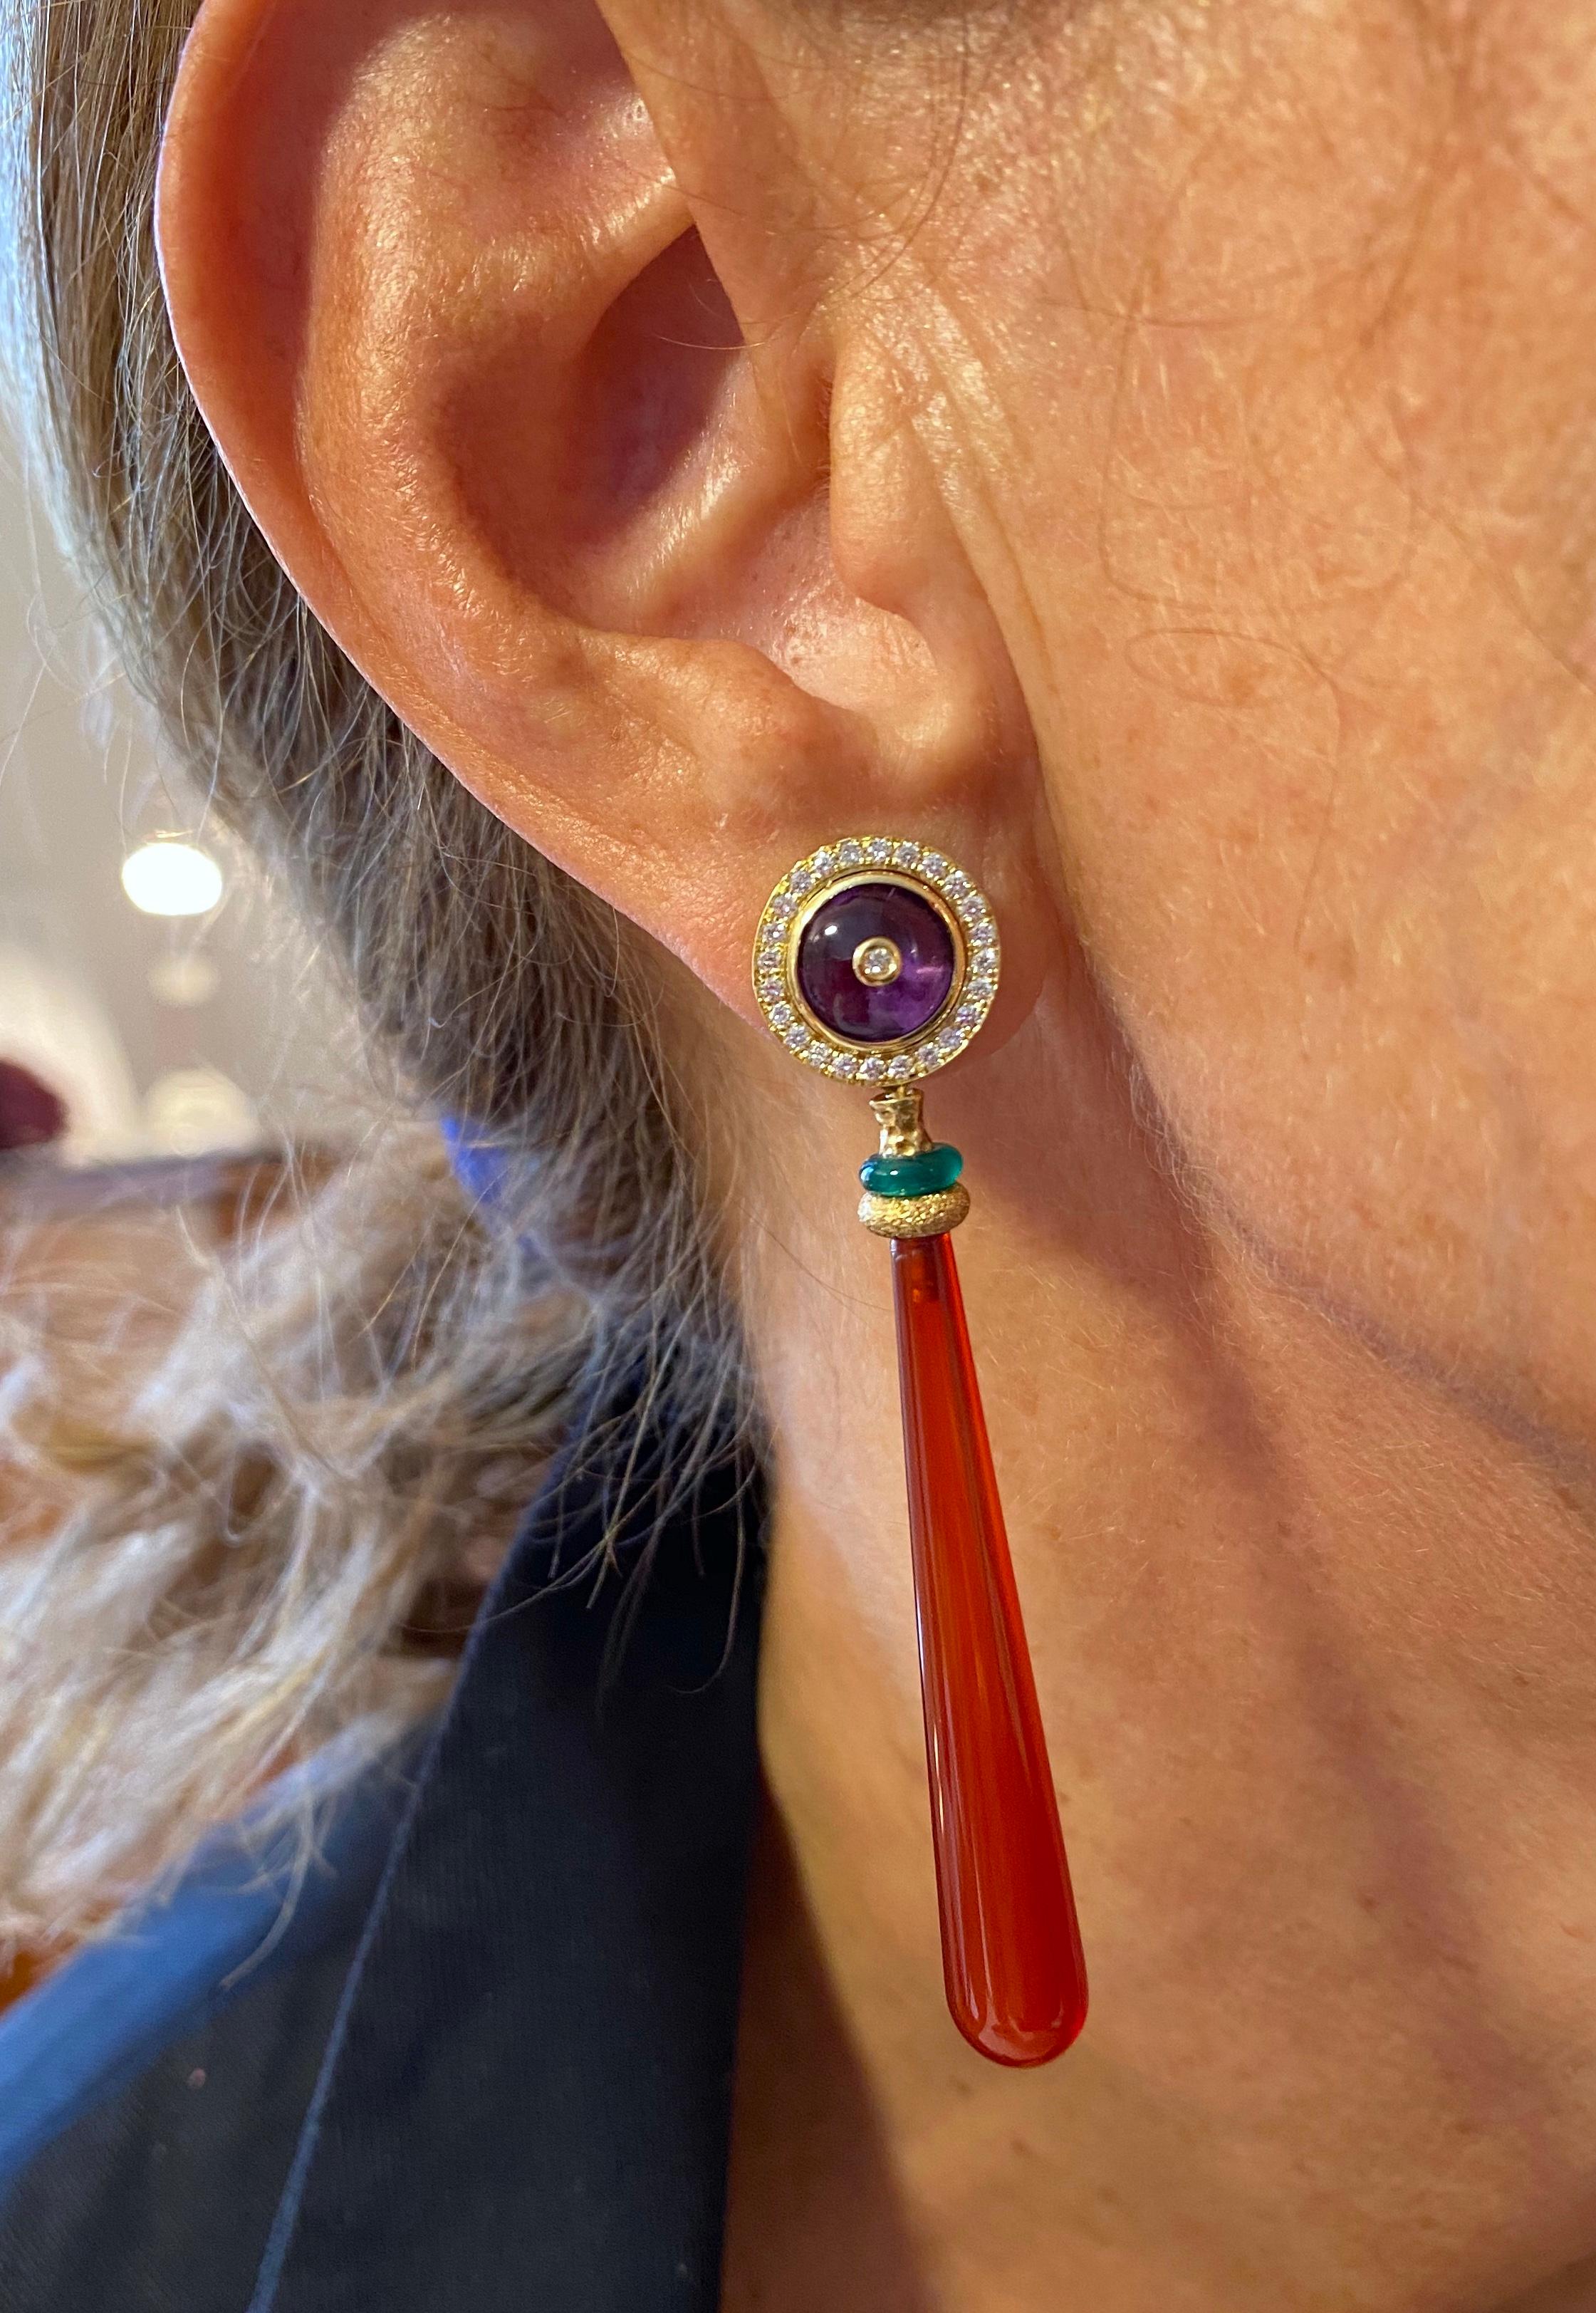 Rossella Ugolini Design Collection, A round amethyst with a single diamond in the center set in 18k yellow gold bezel and surrounded by 0,40 carat of white diamonds ...
A dangling drop carnelian lies with green agate in hammered yellow gold.
This